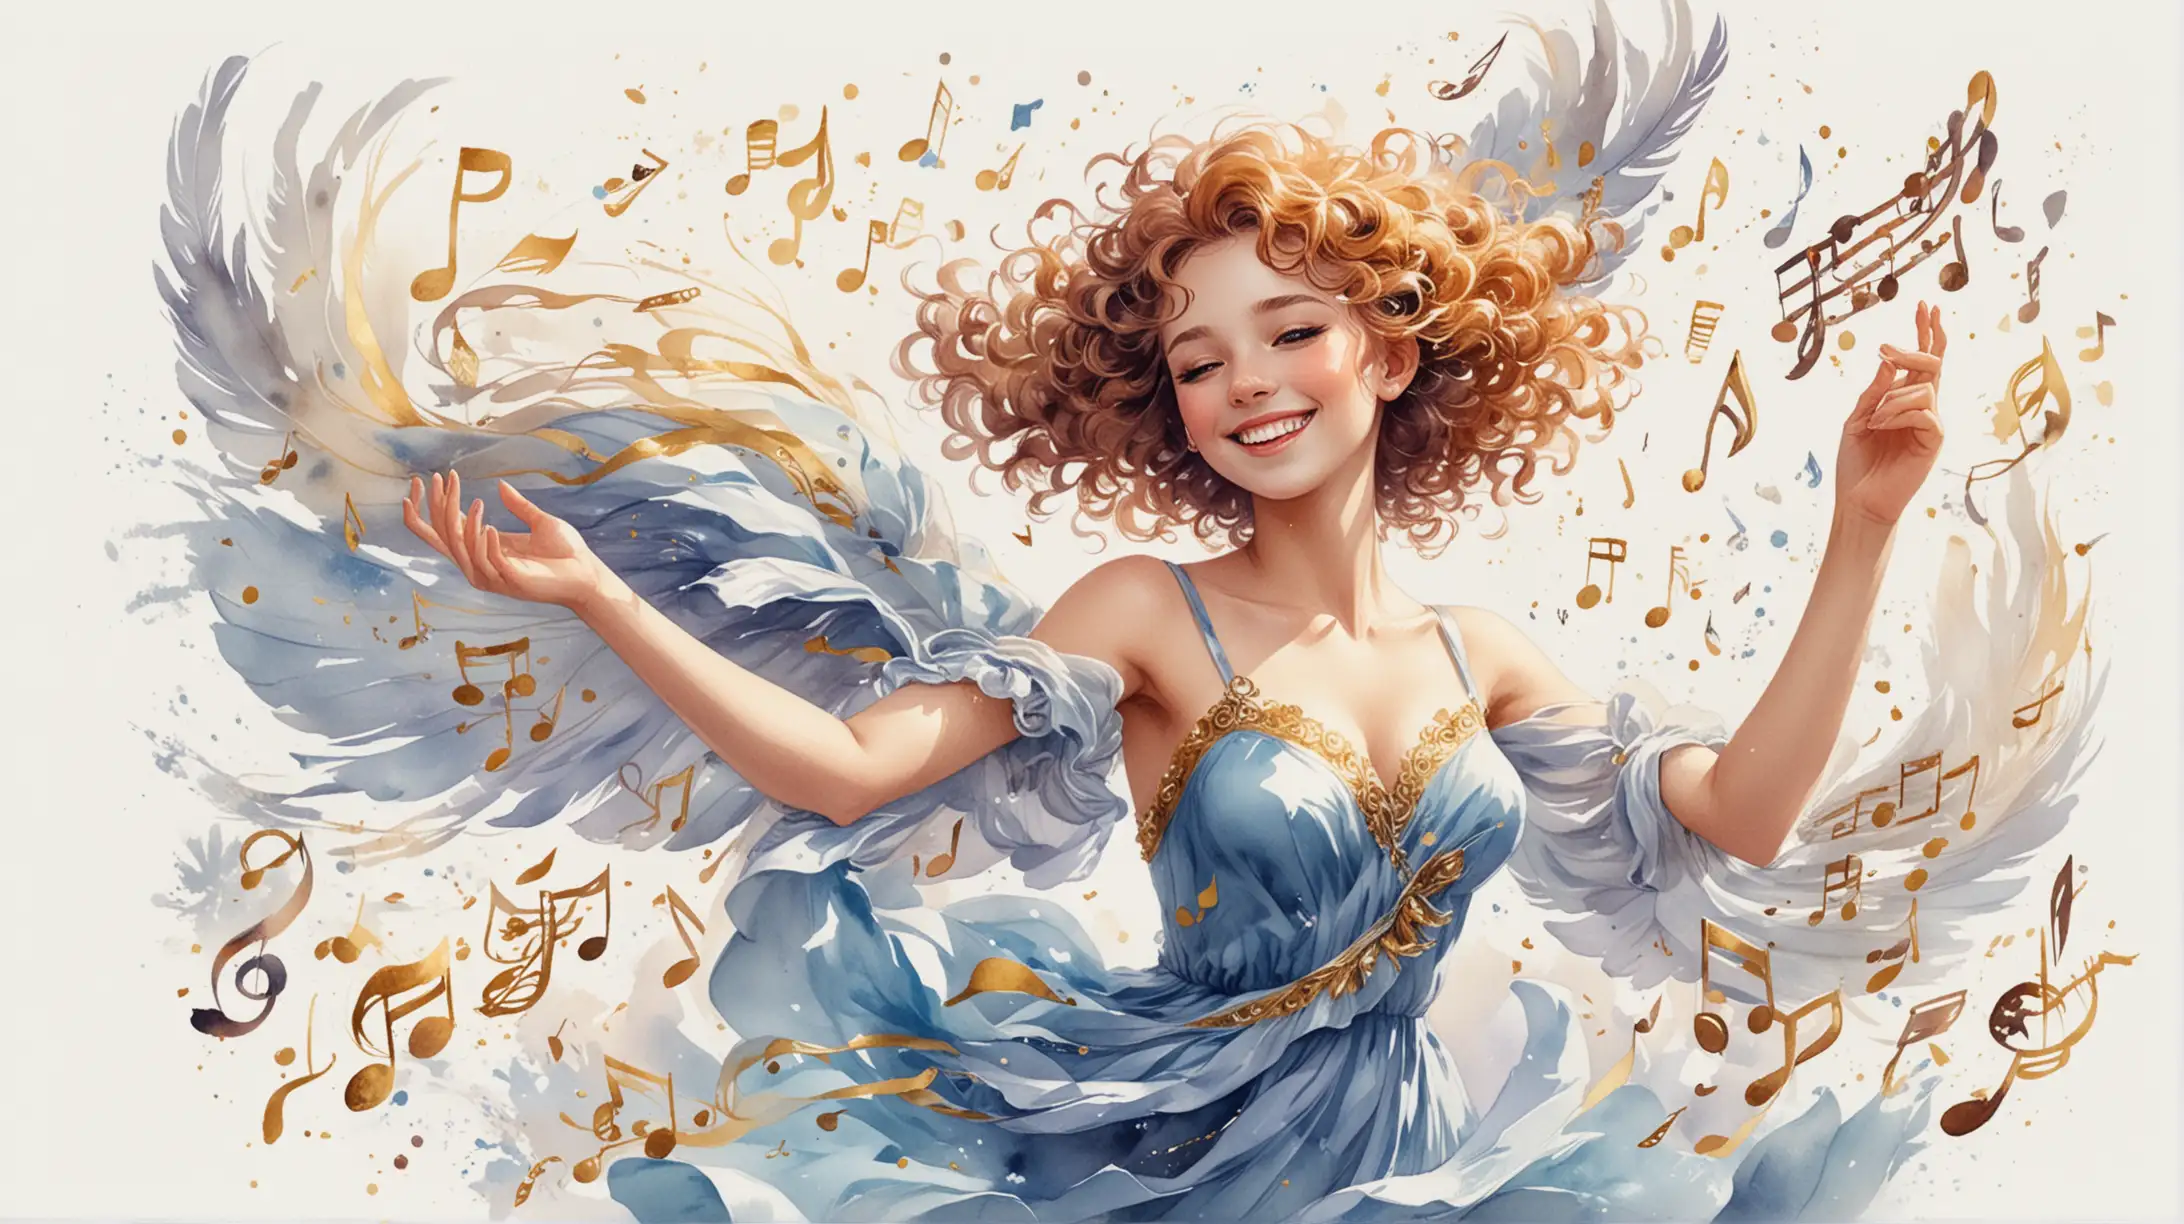 on a white background, painted in watercolor in anime style, the girl muse Euterpe in a light flying havenly blue dress, a happy smile, colorful notes fly out of developing hair, wings from notes, wind, flight, holds a treble clef in elegant palms, inspiration, fantasy, music, curly gold ribbons of black notes